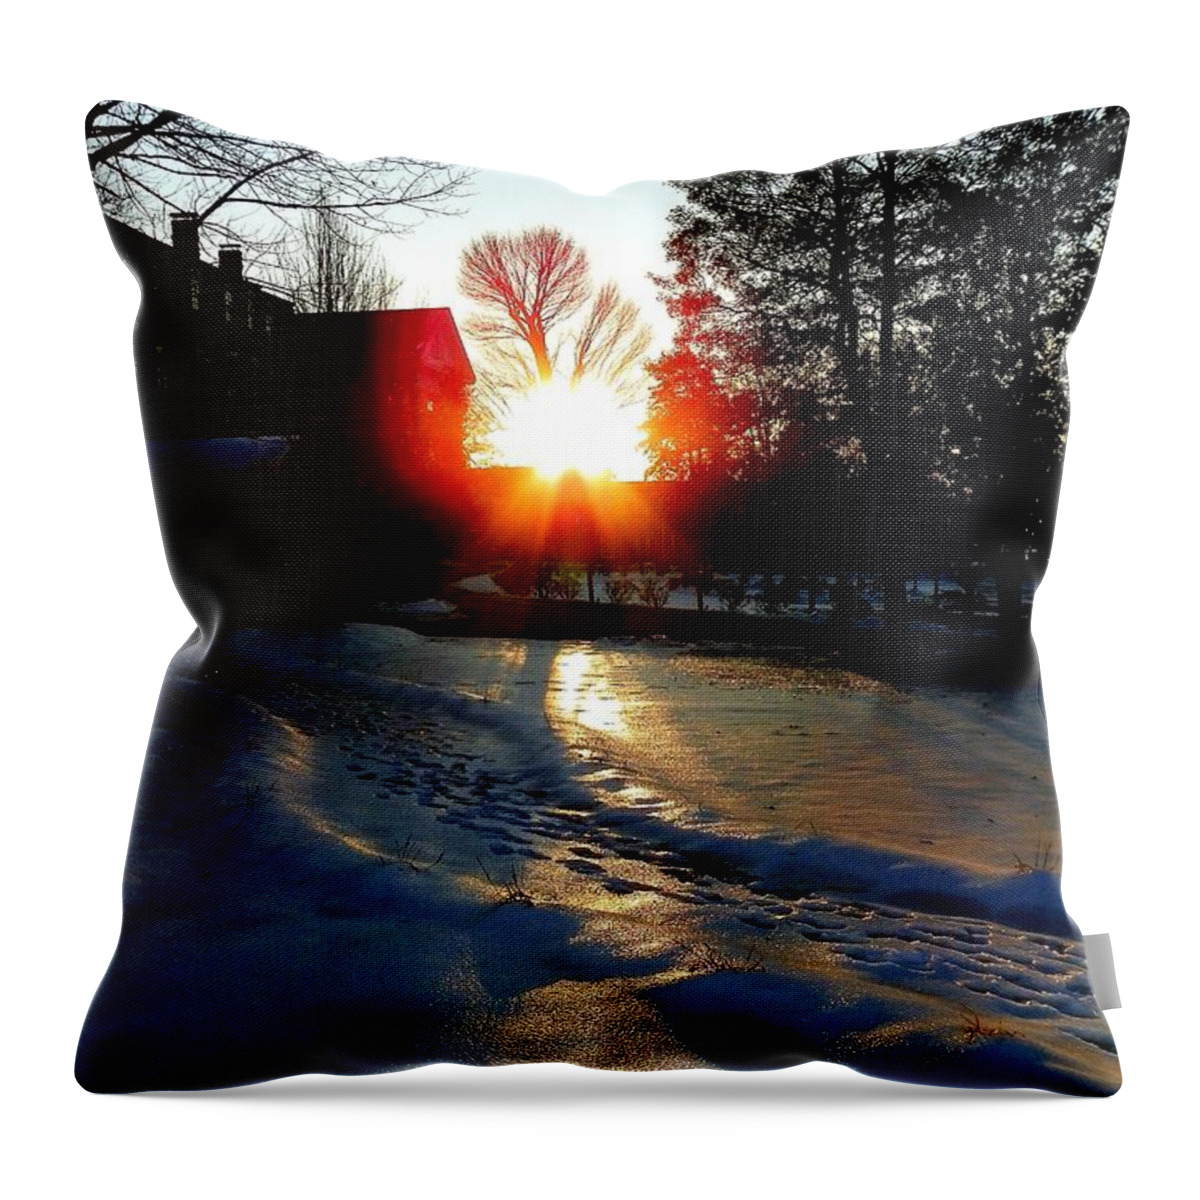 Snow Throw Pillow featuring the photograph The Lighted Path by Karen Wiles